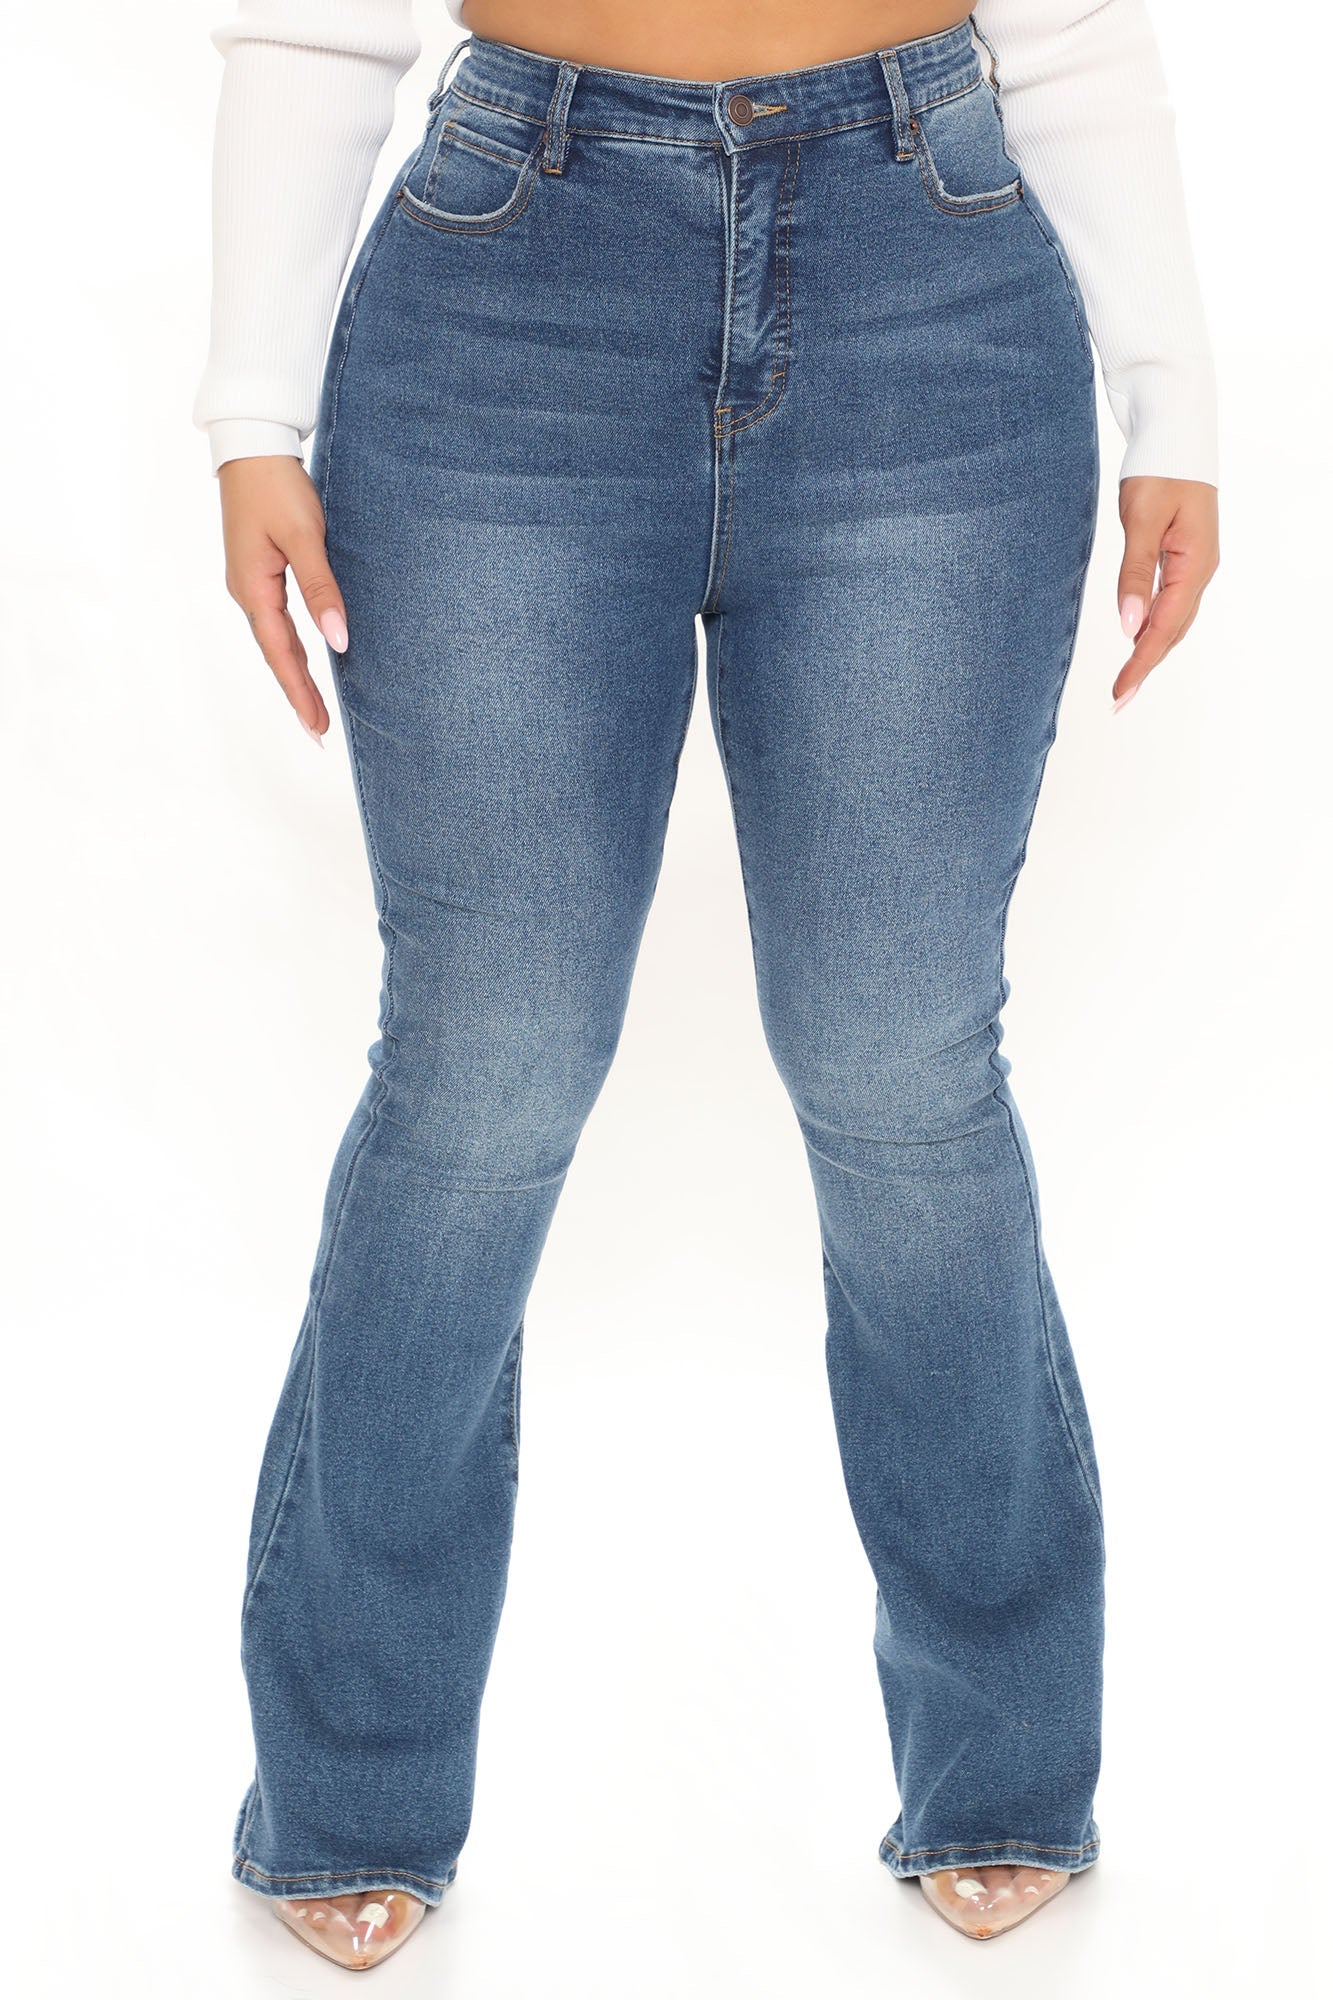 Hometown Babe Smoothing Stretch Bootcut Jeans - Medium Blue Wash